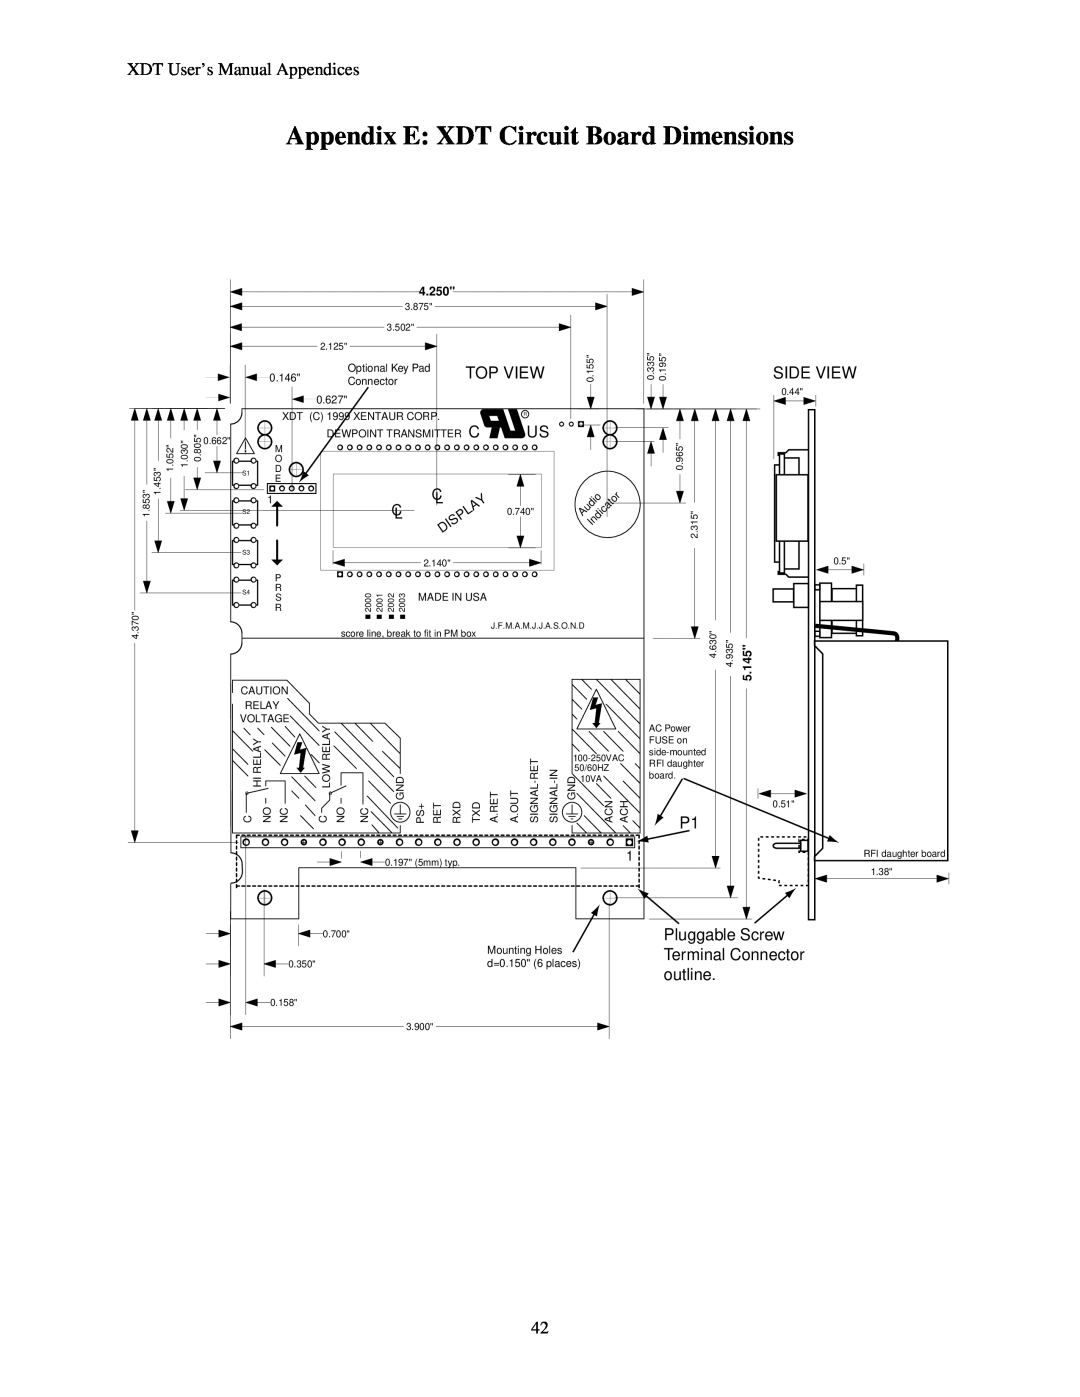 Epson manual Appendix E XDT Circuit Board Dimensions, Top View, Side View, Pluggable Screw, Terminal Connector, outline 